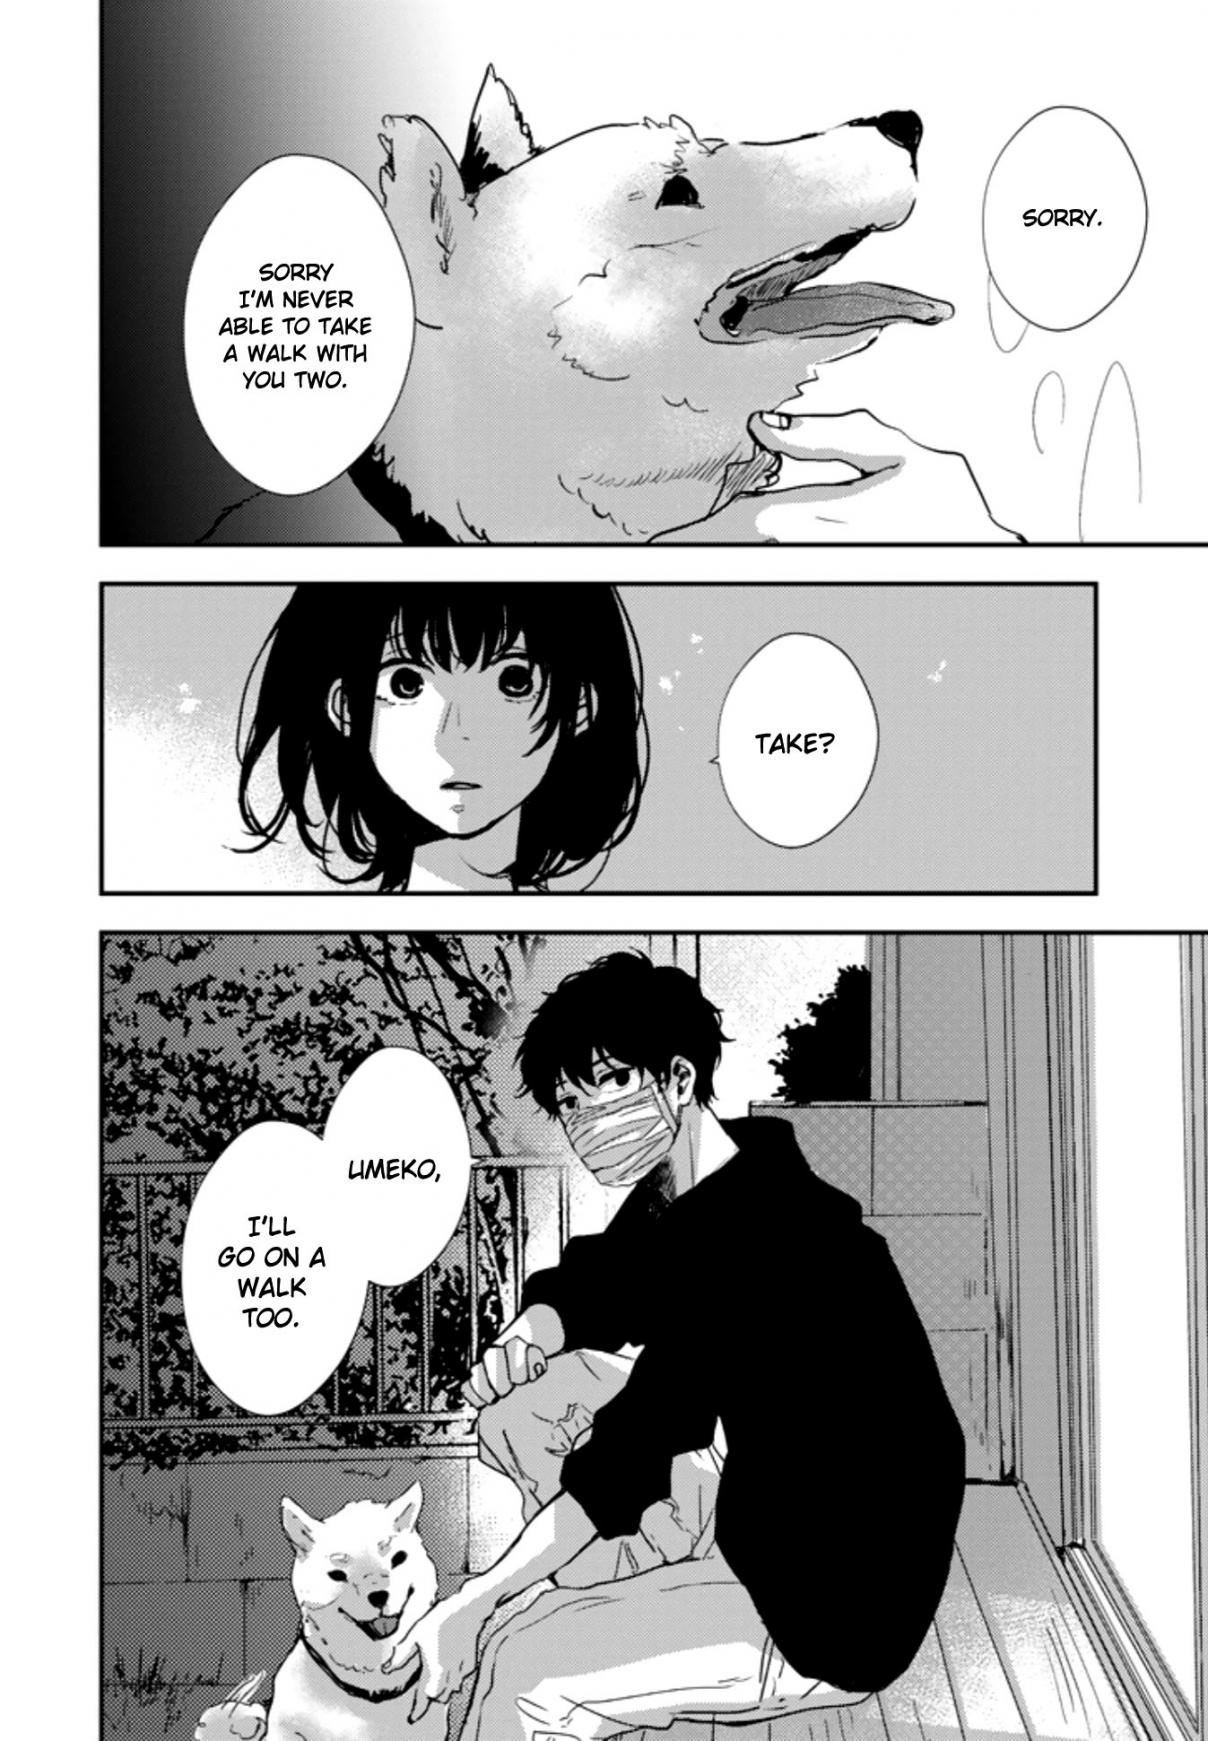 10th You and I fell in love with the same person. Vol. 1 Ch. 2 He'll Probably Be Taken From Me